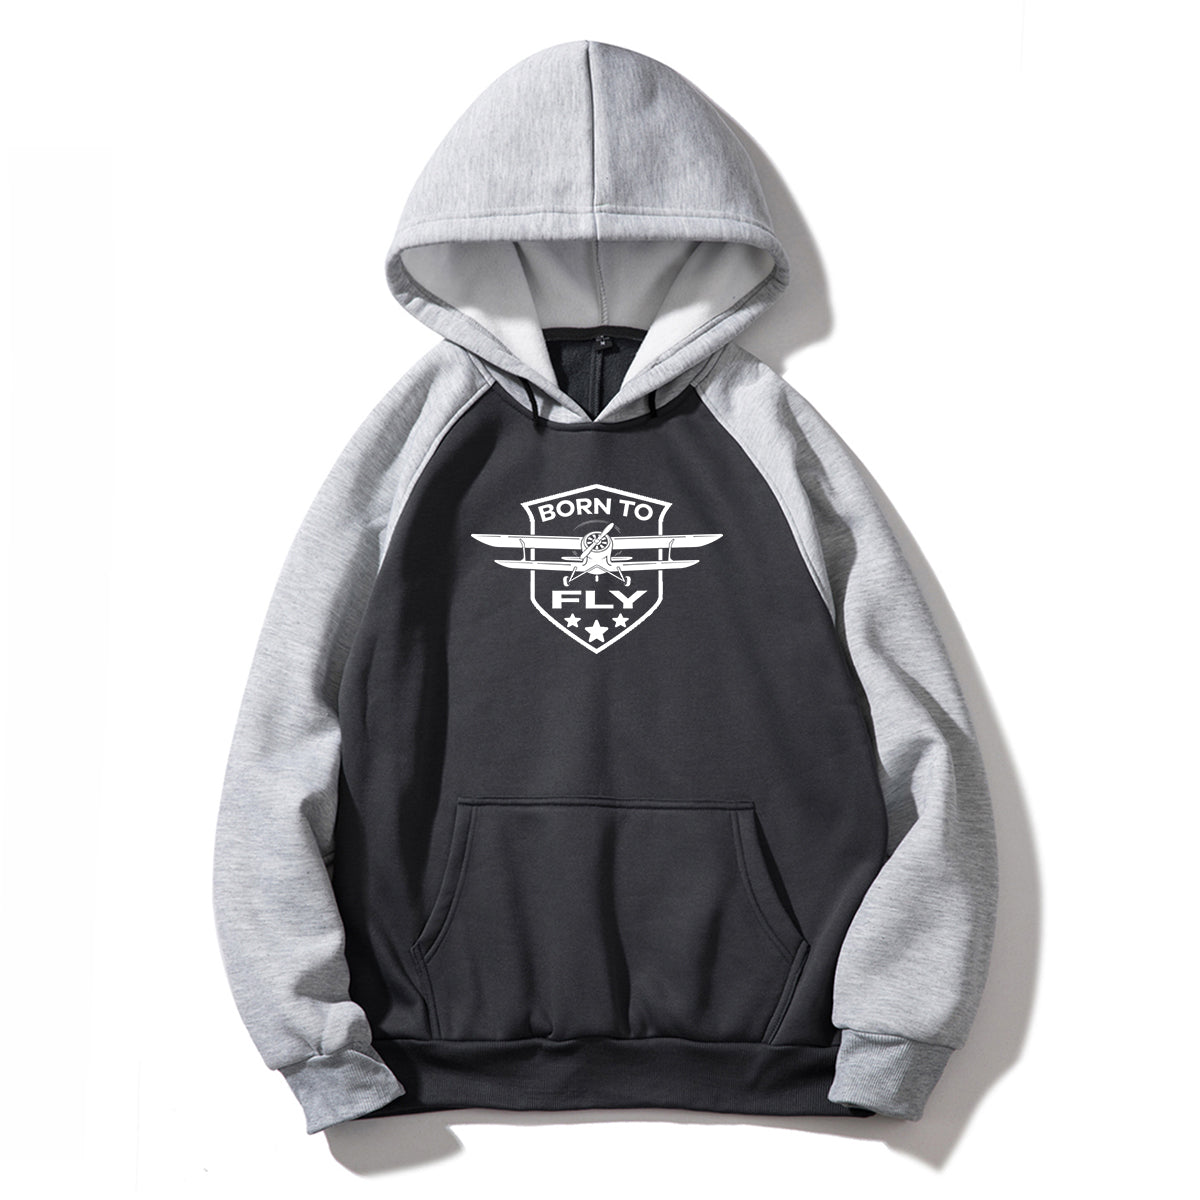 Born To Fly Designed Designed Colourful Hoodies